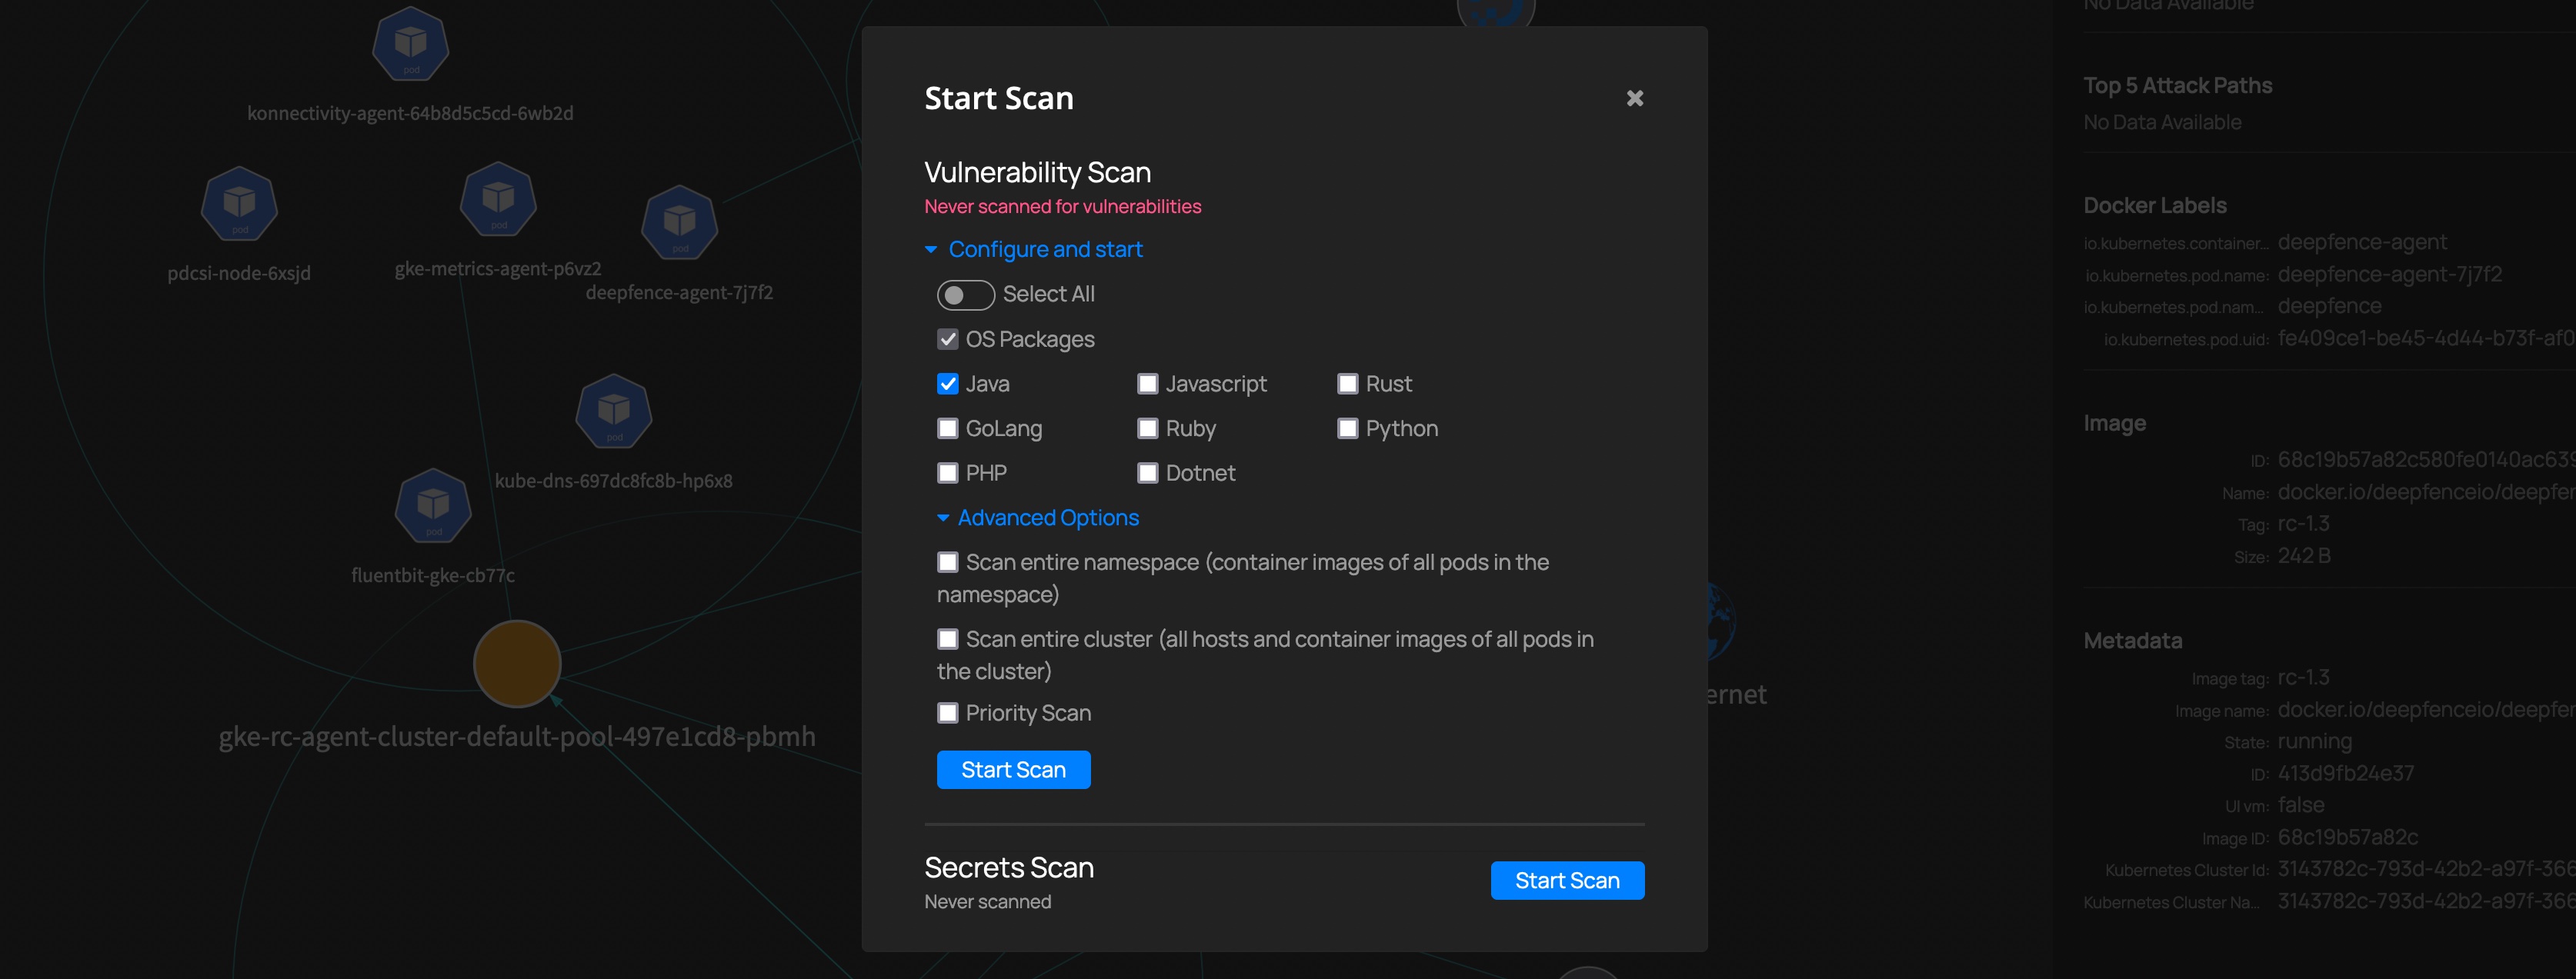 Vulnerability Scan - choose what to scan